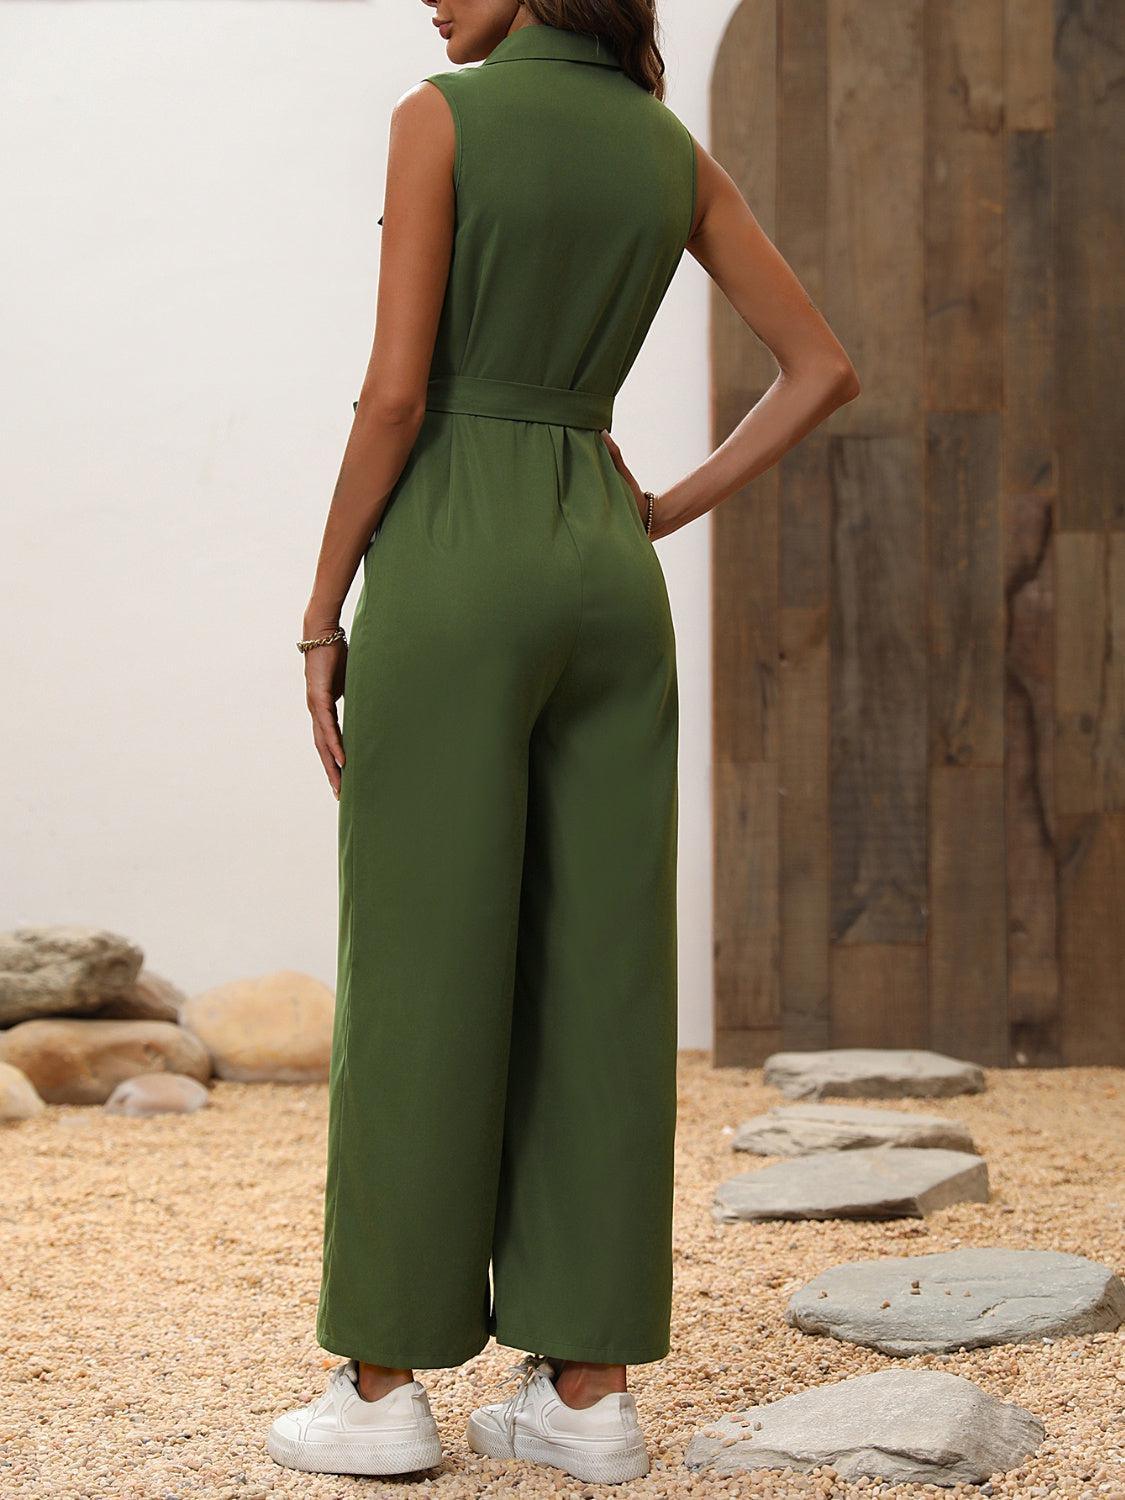 a woman in a green jumpsuit standing on rocks